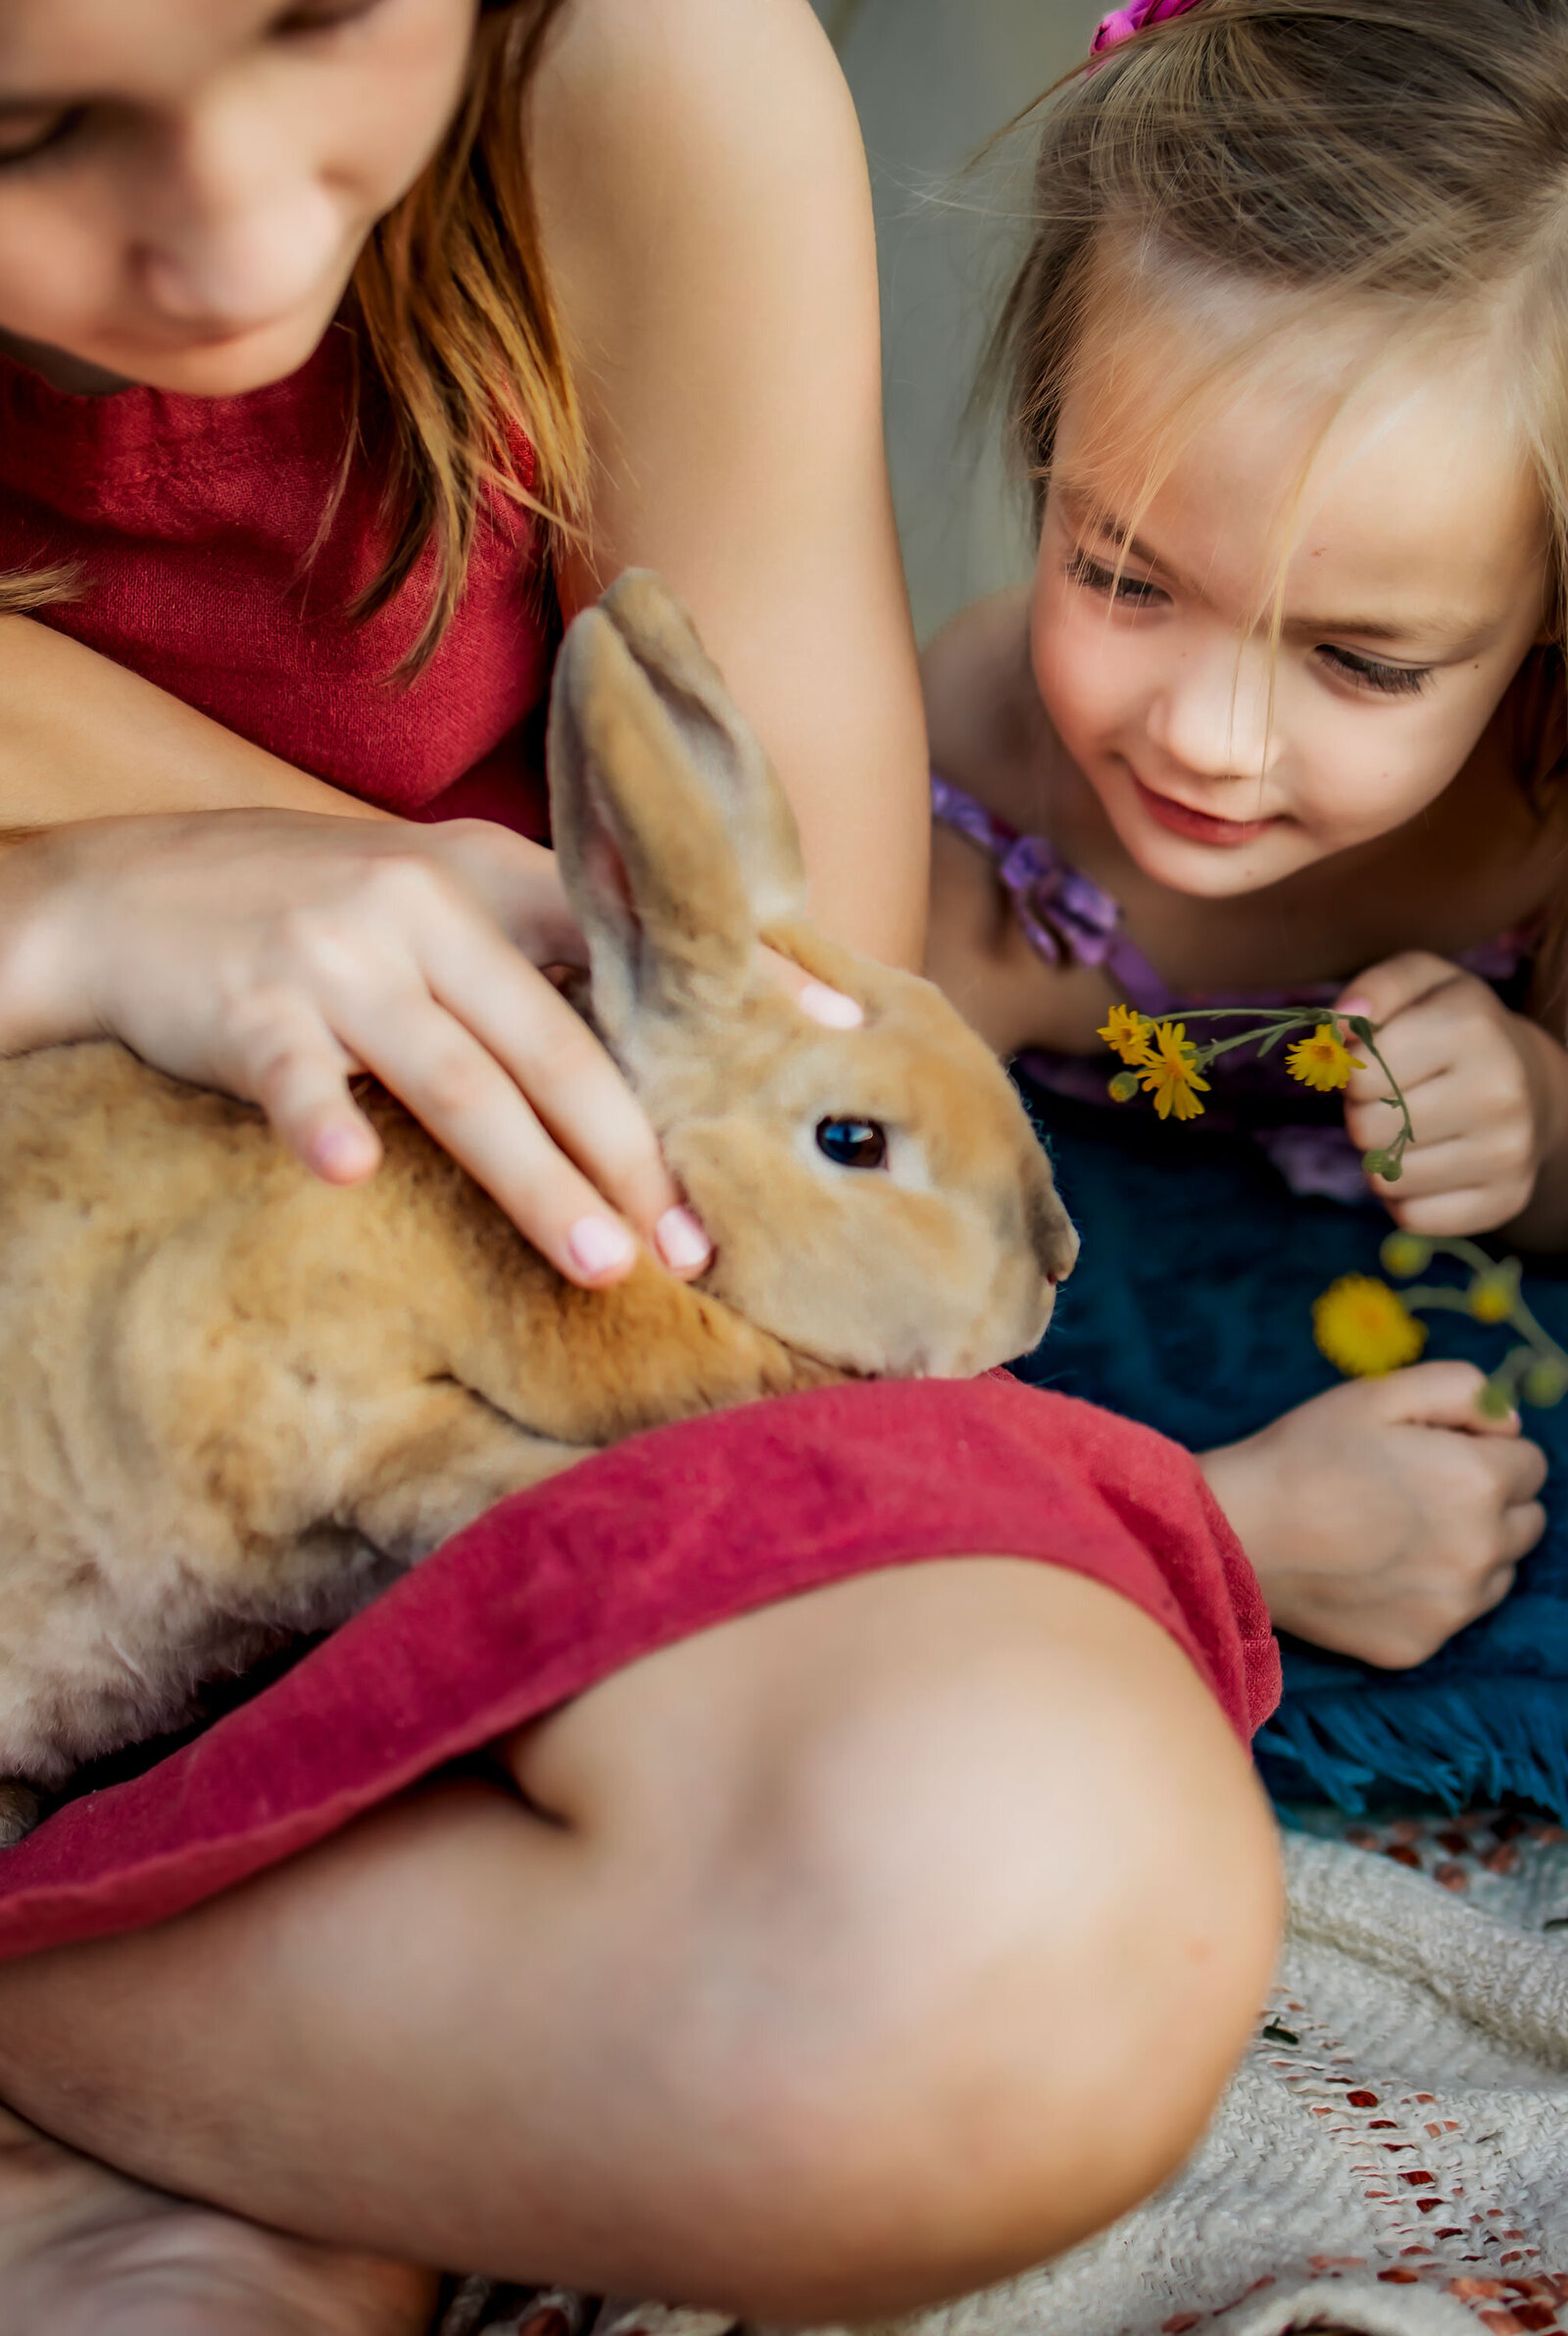 five year old plays with a live bunny outside